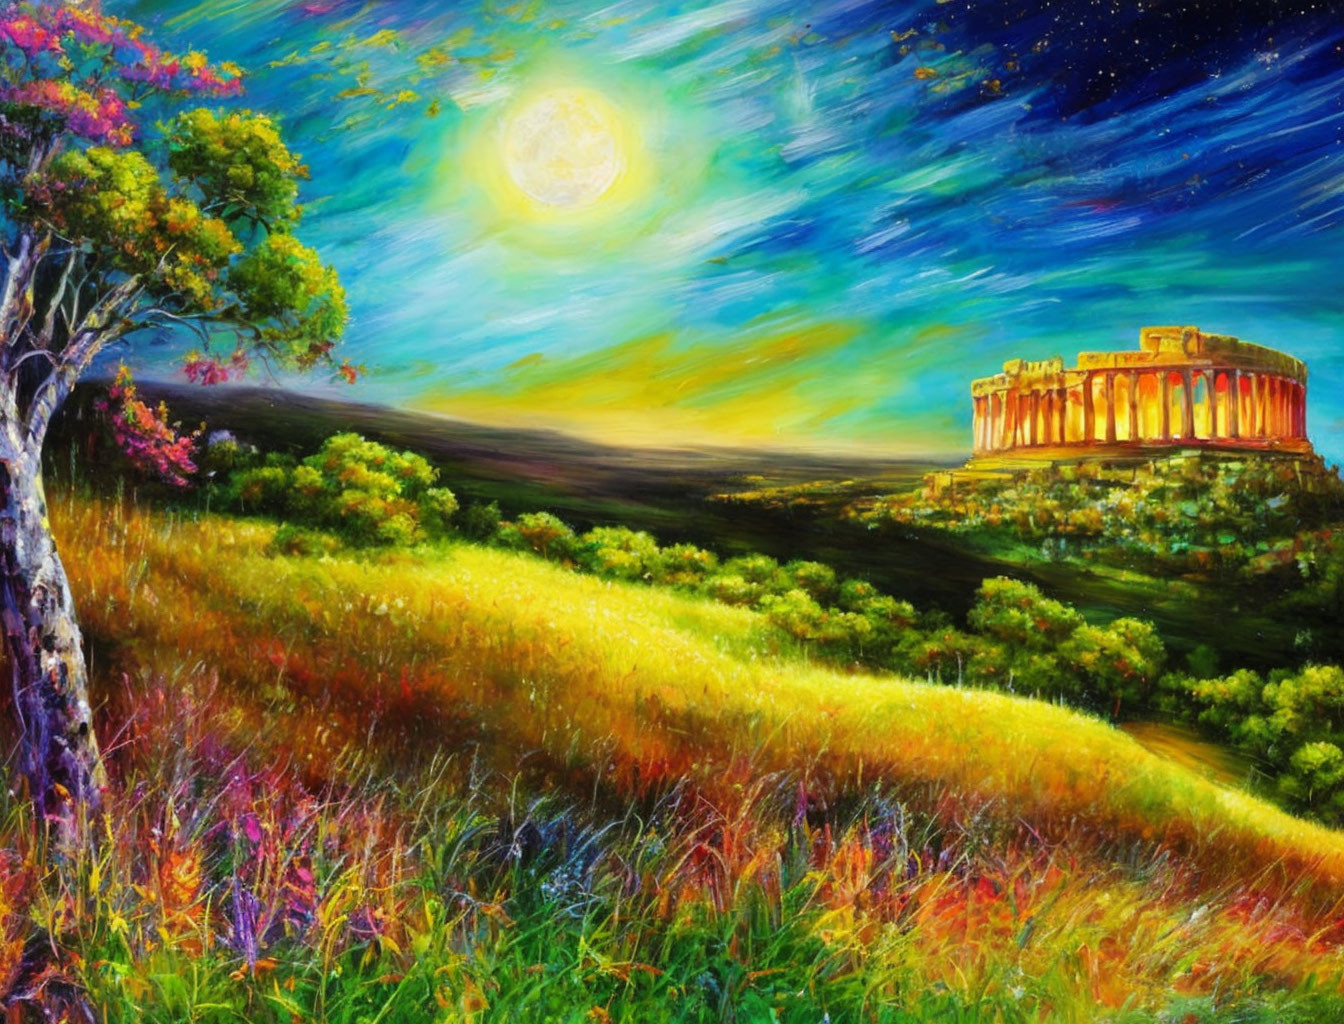 Moonlit landscape with Acropolis on hill in vibrant painting